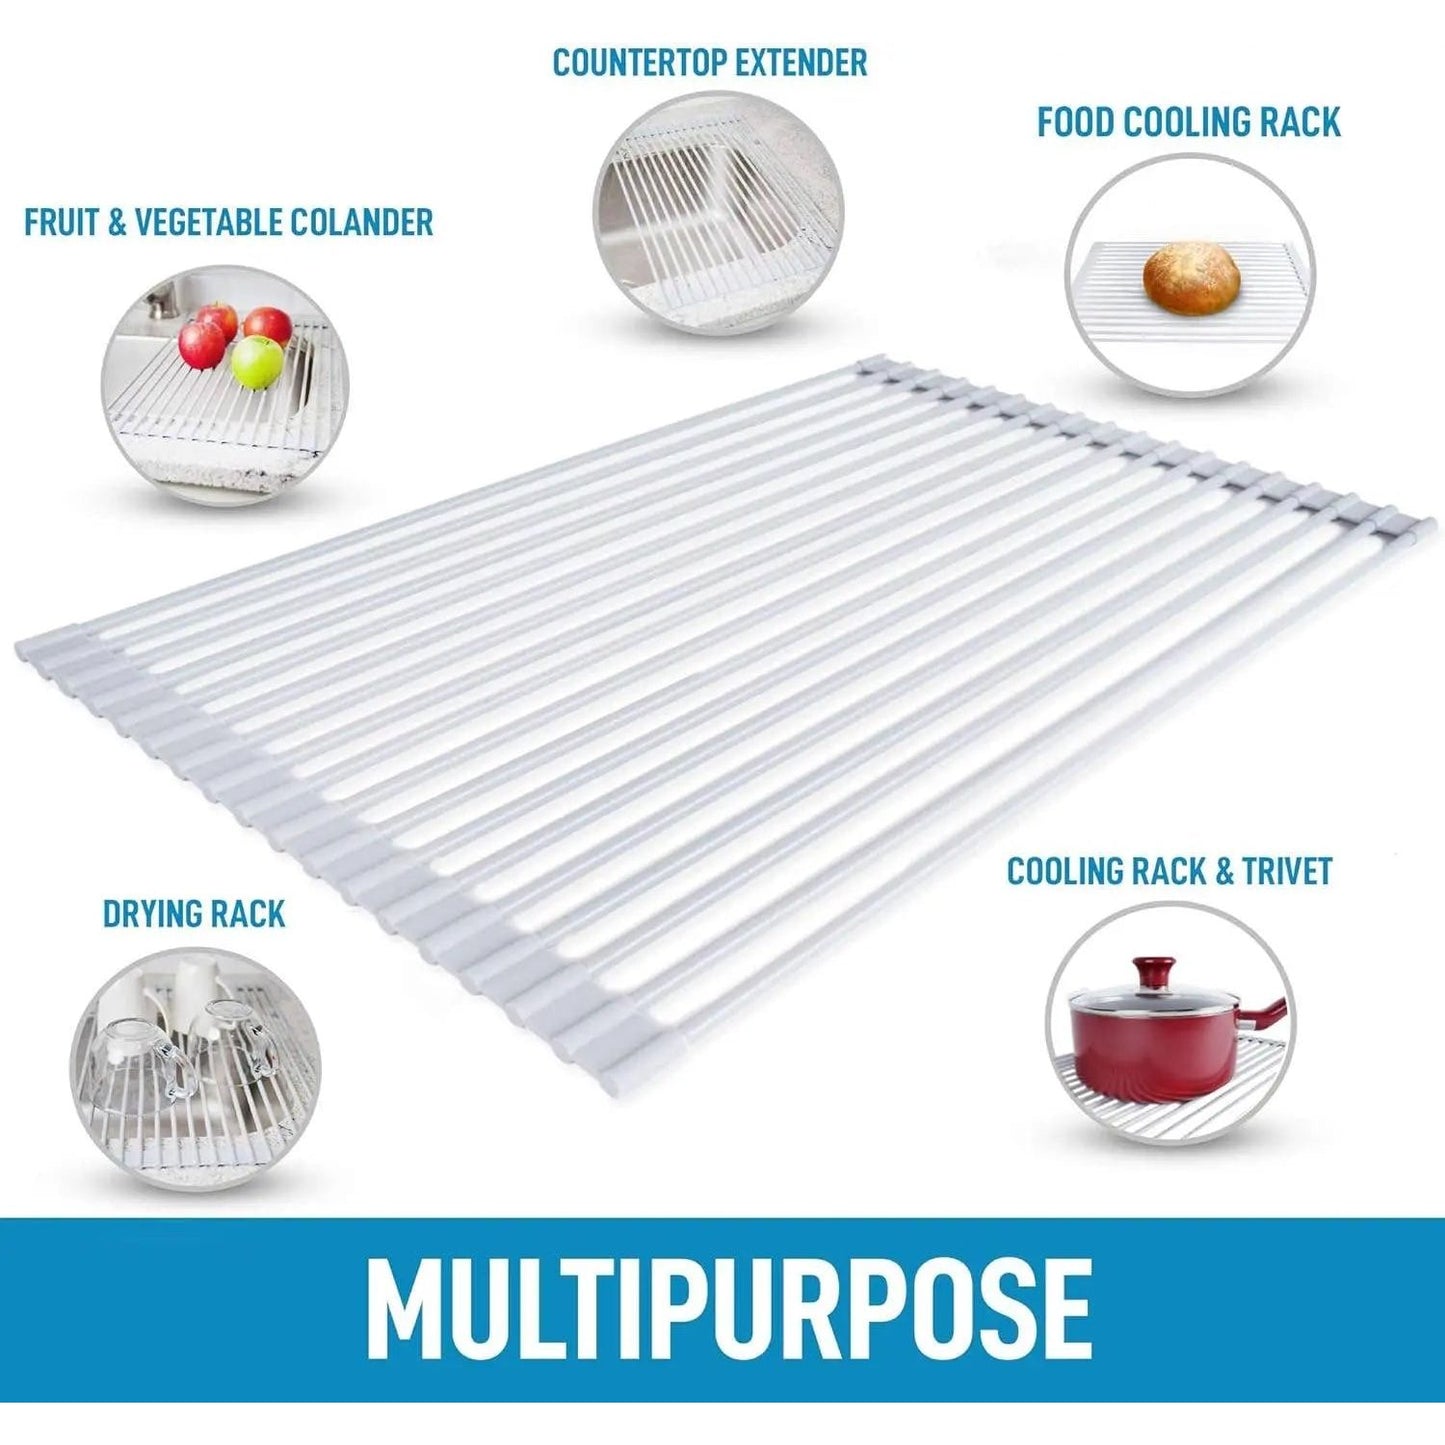 Multipurpose Roll Up Sink Drying Rack & Trivet Cooks Tools Browns Kitchen